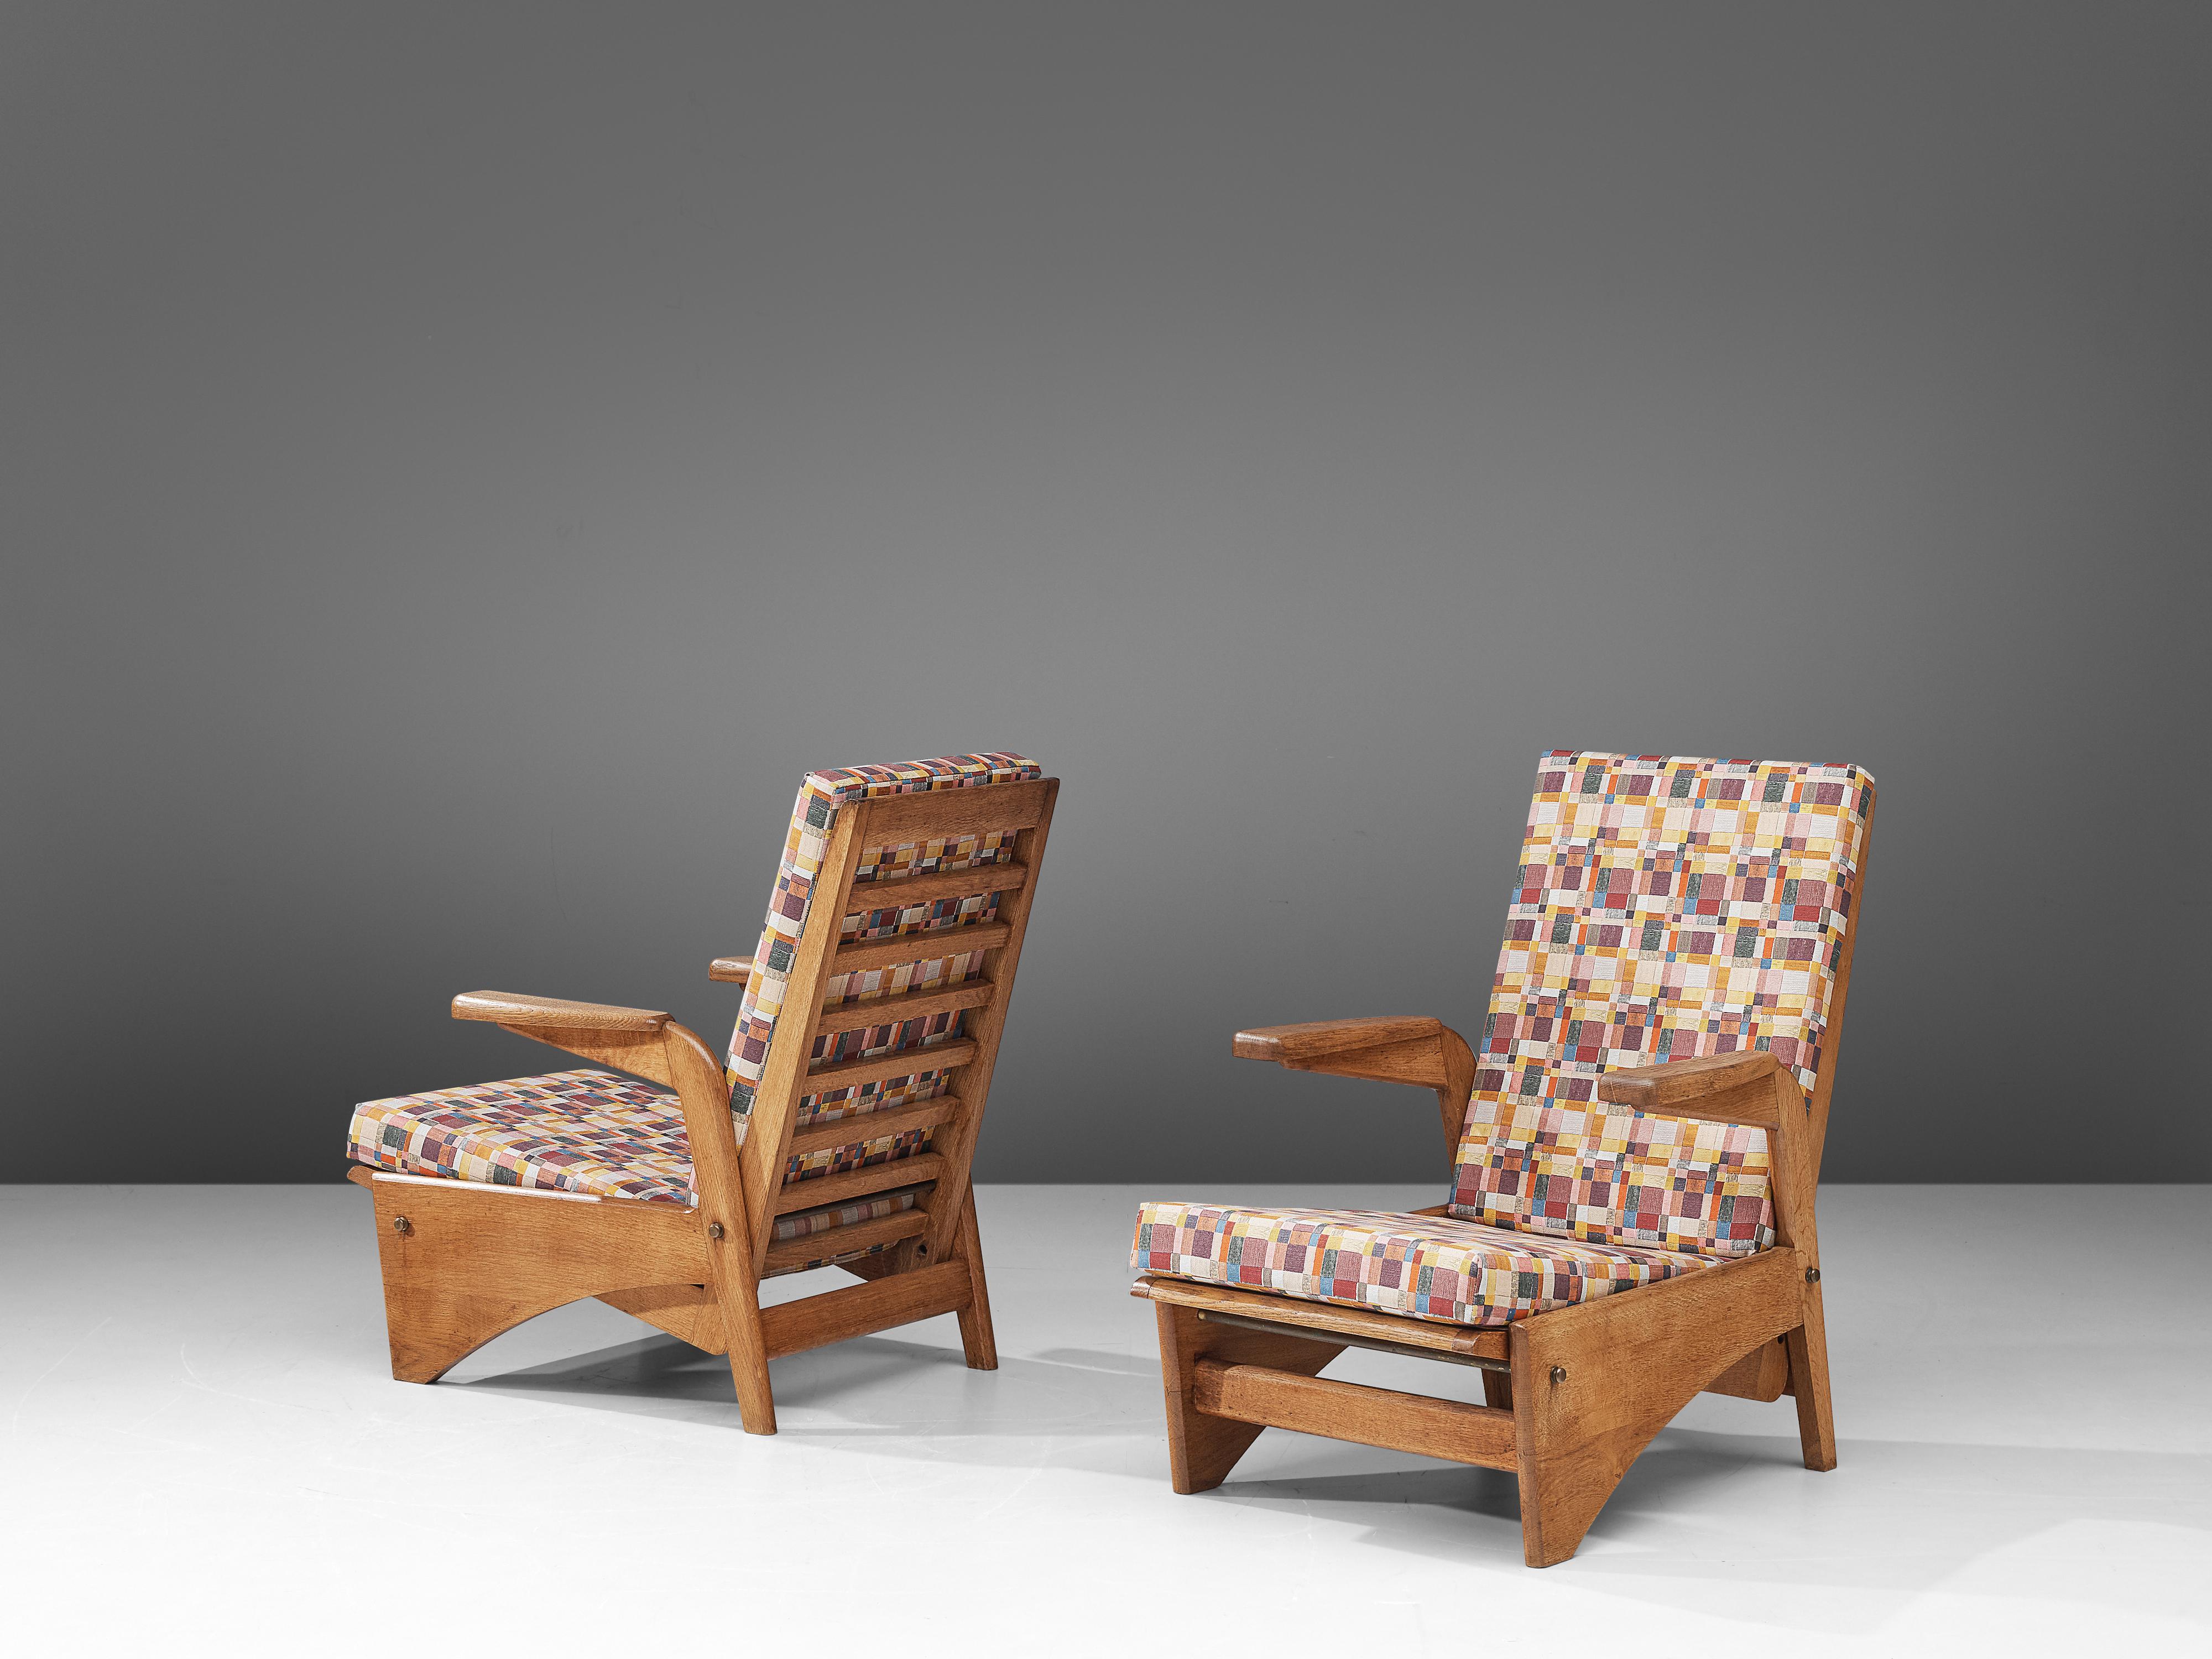 Gustave Gautier, pair of lounge chairs, oak, fabric, France, 1954.

This sculptural set of easy chairs by Gustave Gautier is very well executed and made out of solid oak. The slatted backrest and seat are adjustable to make it a comfortable lounger.